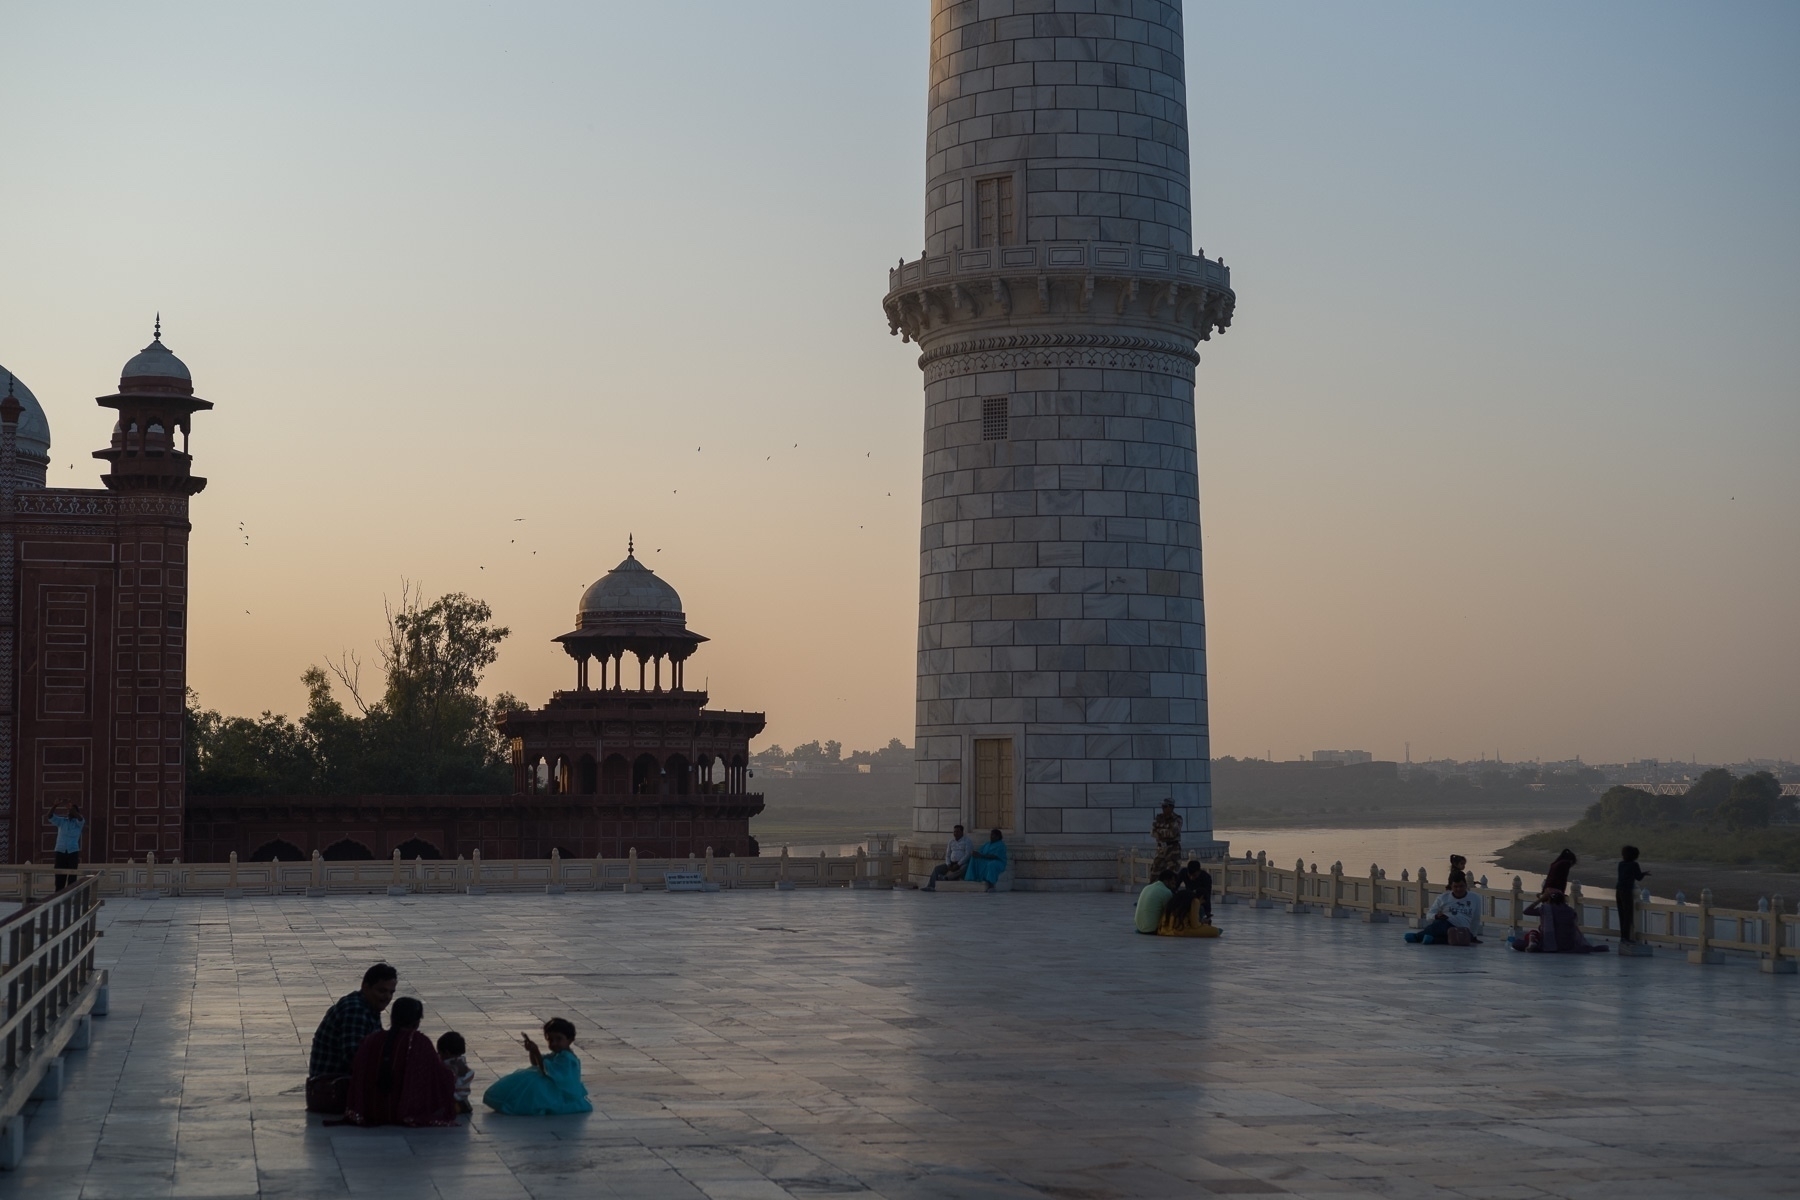 Plaza on the backside of the Taj Mahal at sunset with partial views of a minor, the mosque and the Yamuna river.